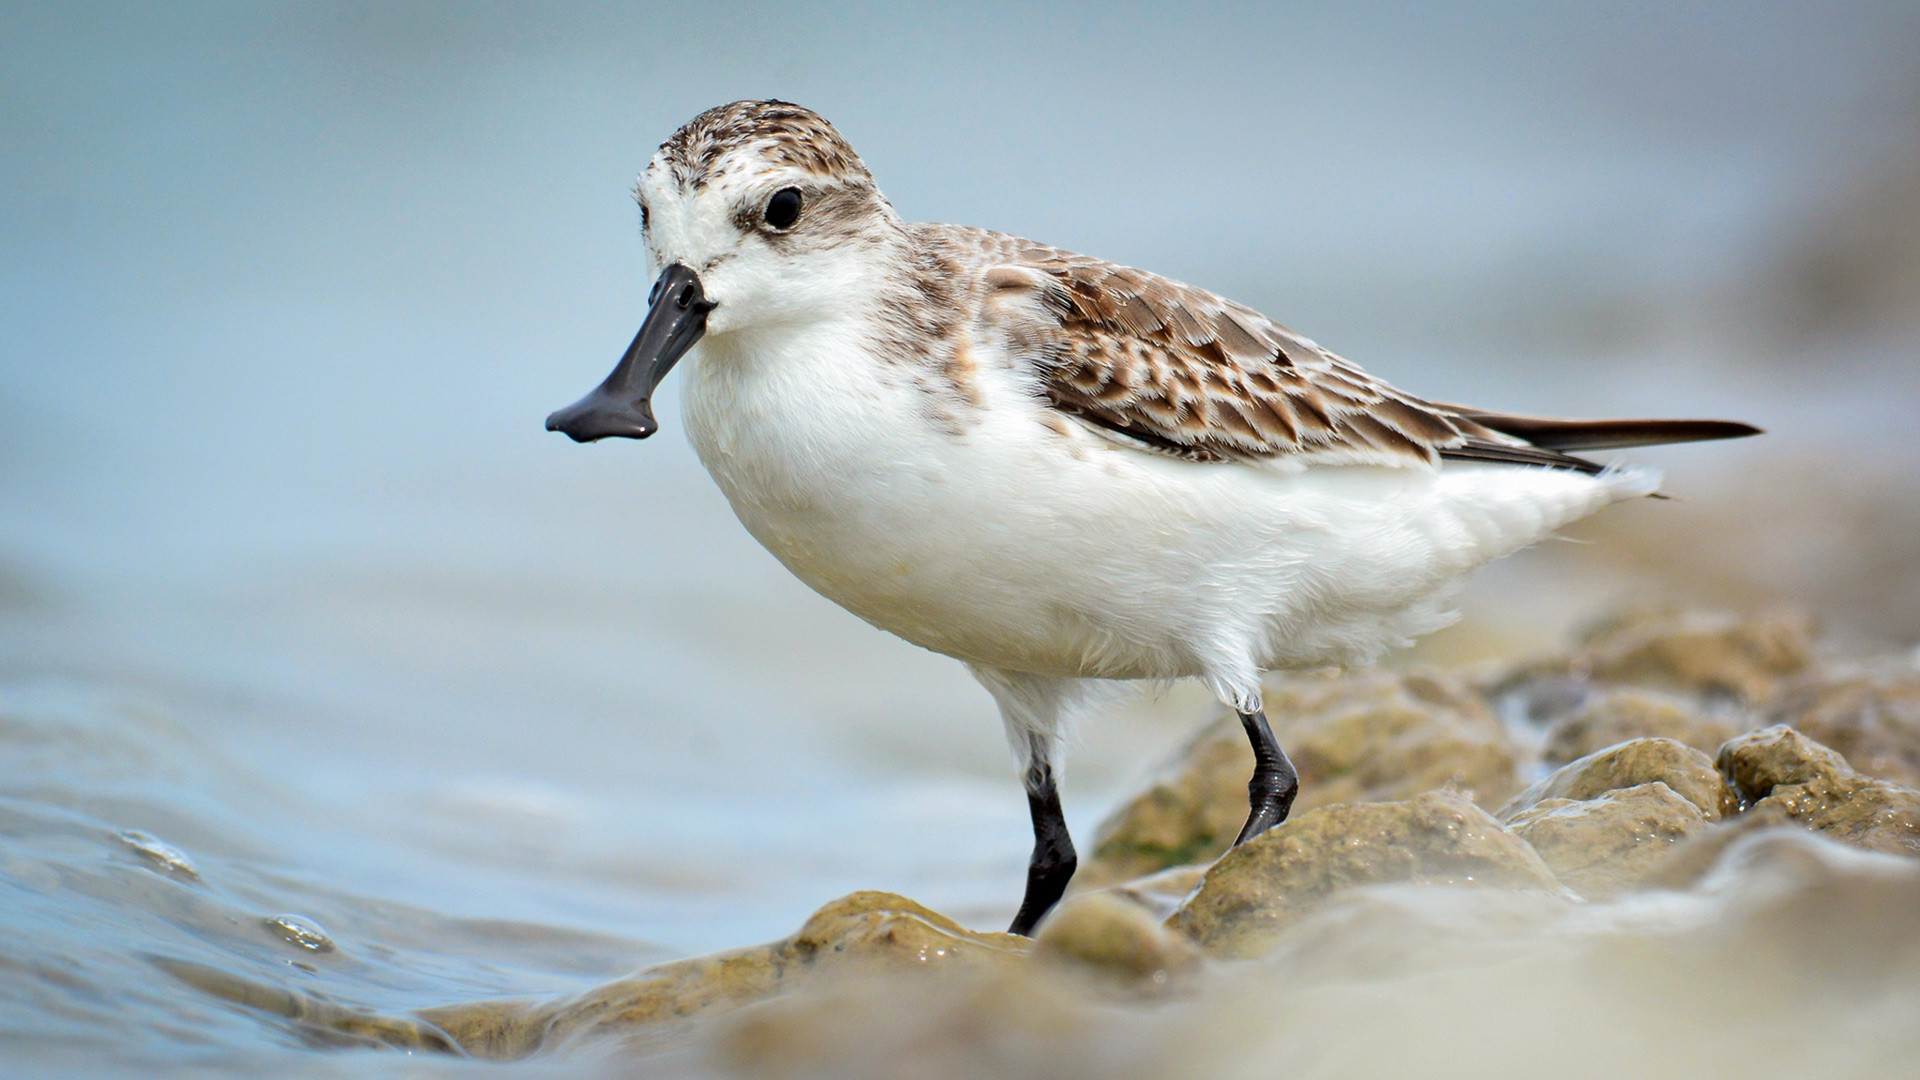 A spoon-billed sandpiper is a small wader which breeds in the Chukotka region in Russia and winters in Southeast Asia. According to Tomkovich, the species is at risk of extinction. 